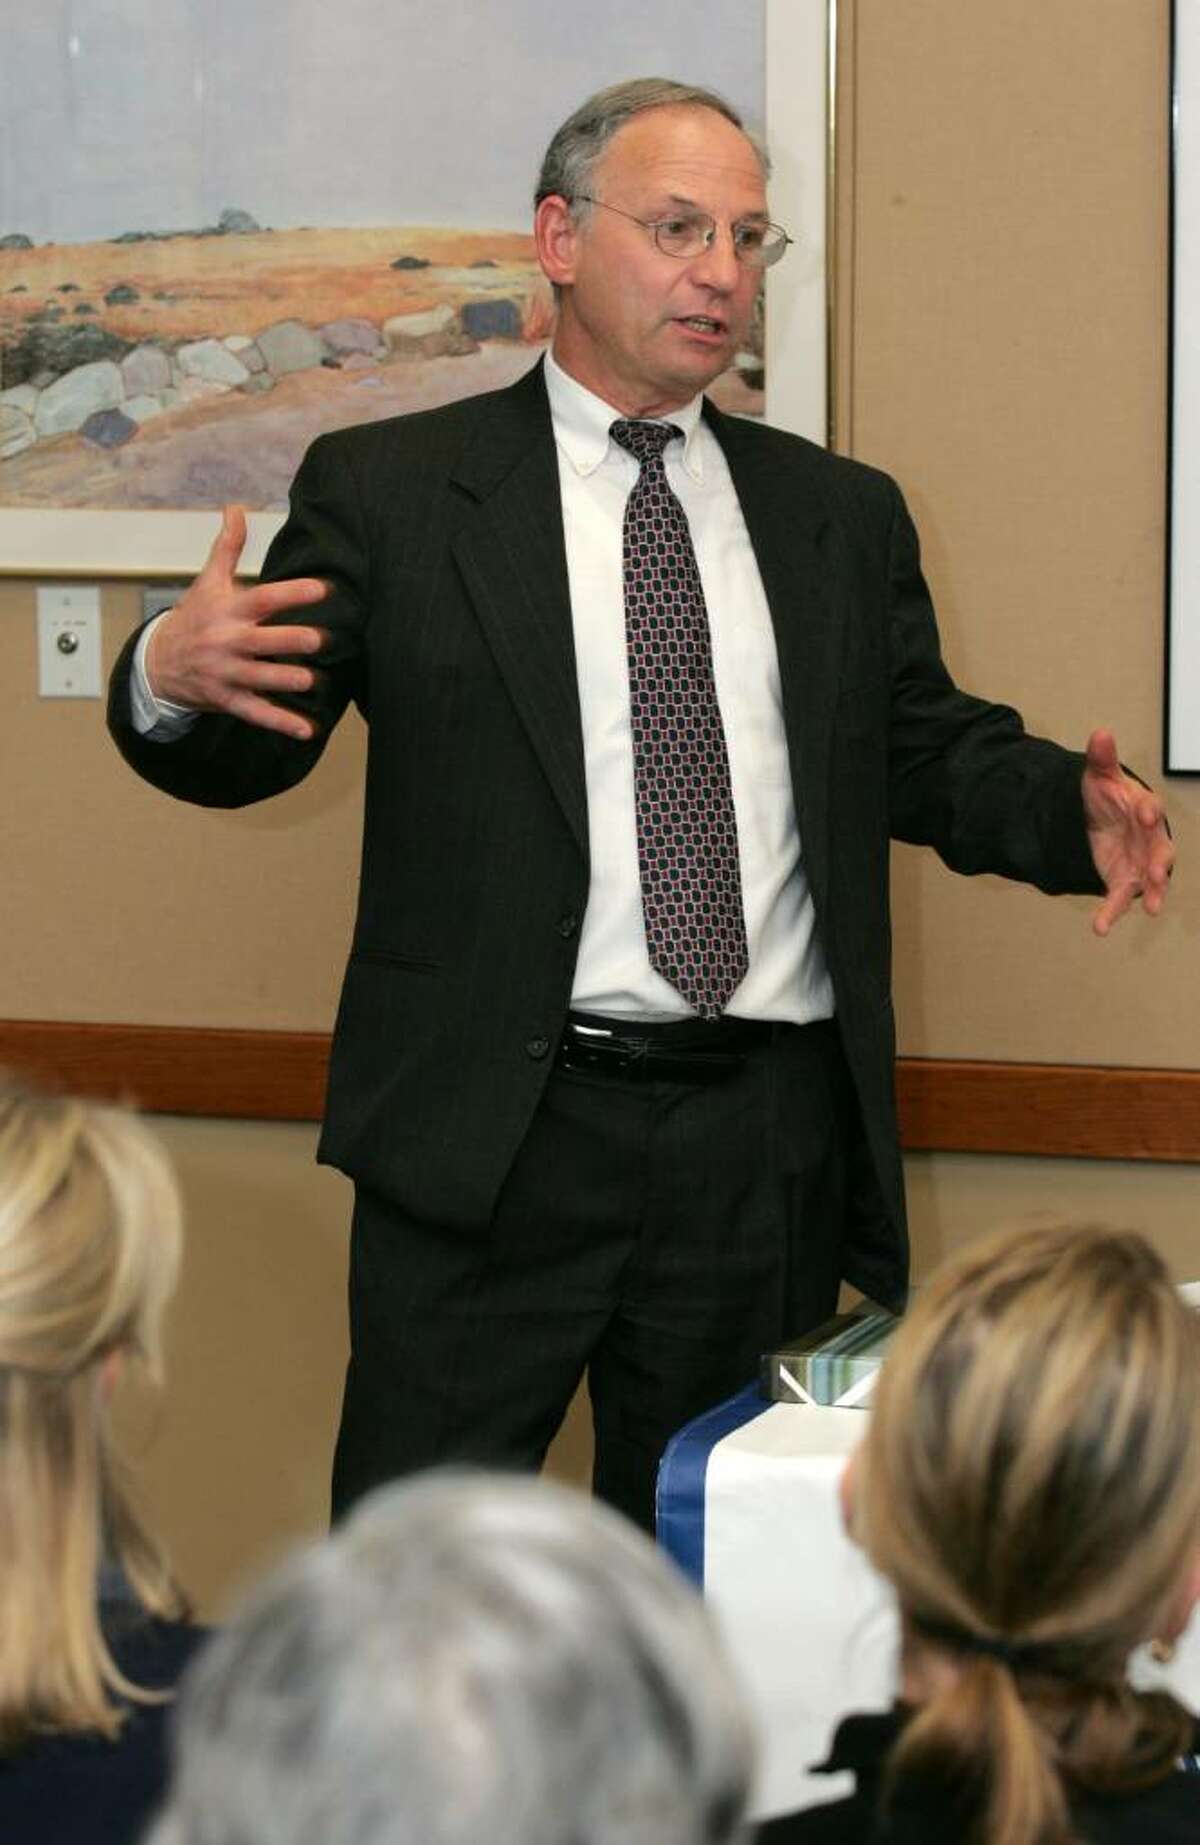 Greenwich Superintendent of Schools Dr. Sidney Freund addressed members of the Greenwich League of Women Voters at the Cos Cob Library on the challenges and accomplishments of the school system.